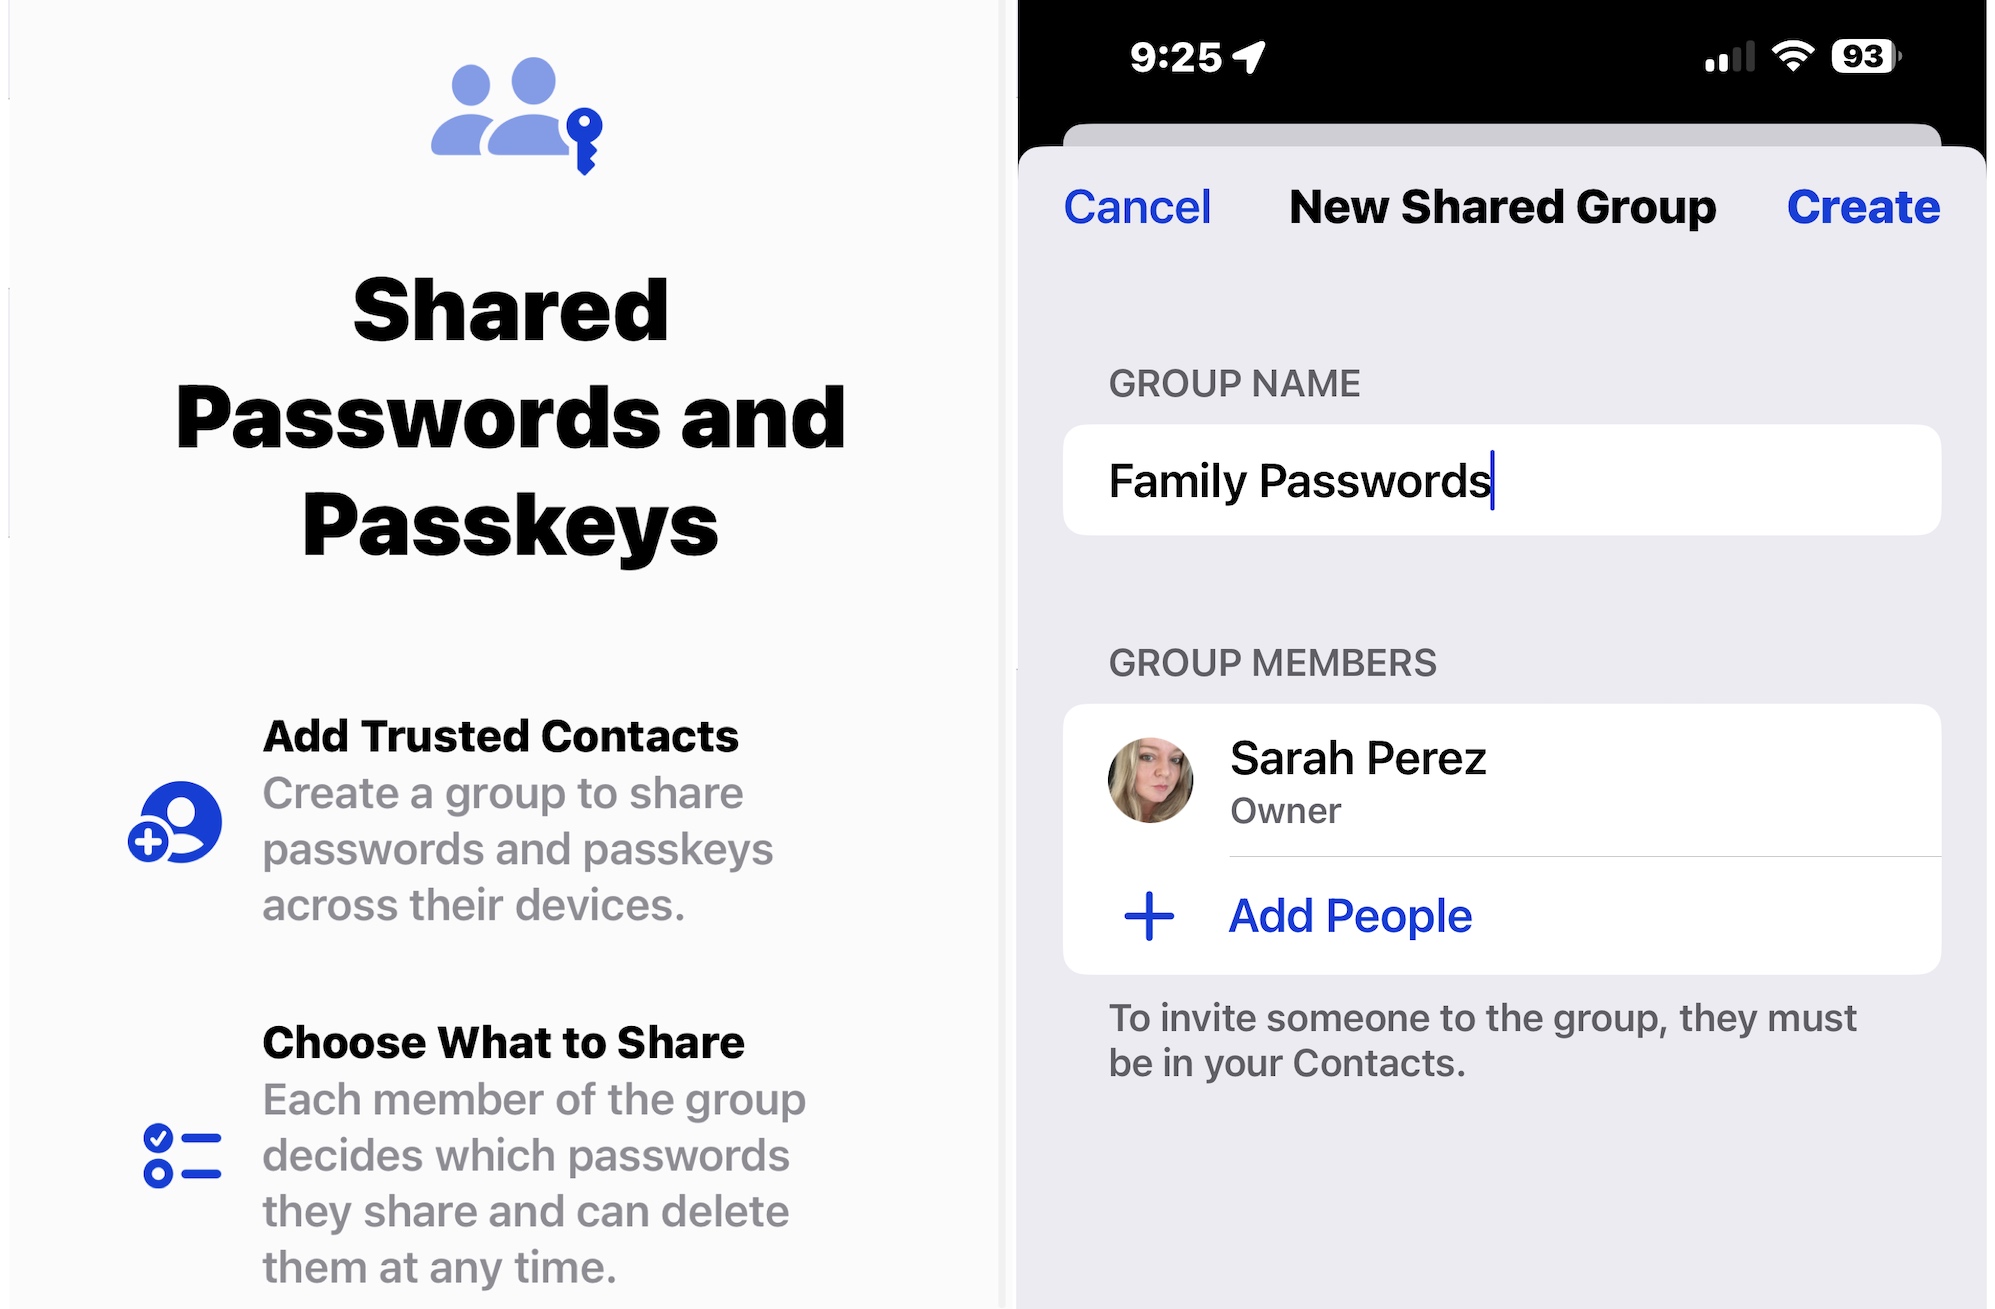 Two side-by-side screenshots showing shared passwords and access keys, including the ability to set shared credentials that are end-to-end encrypted